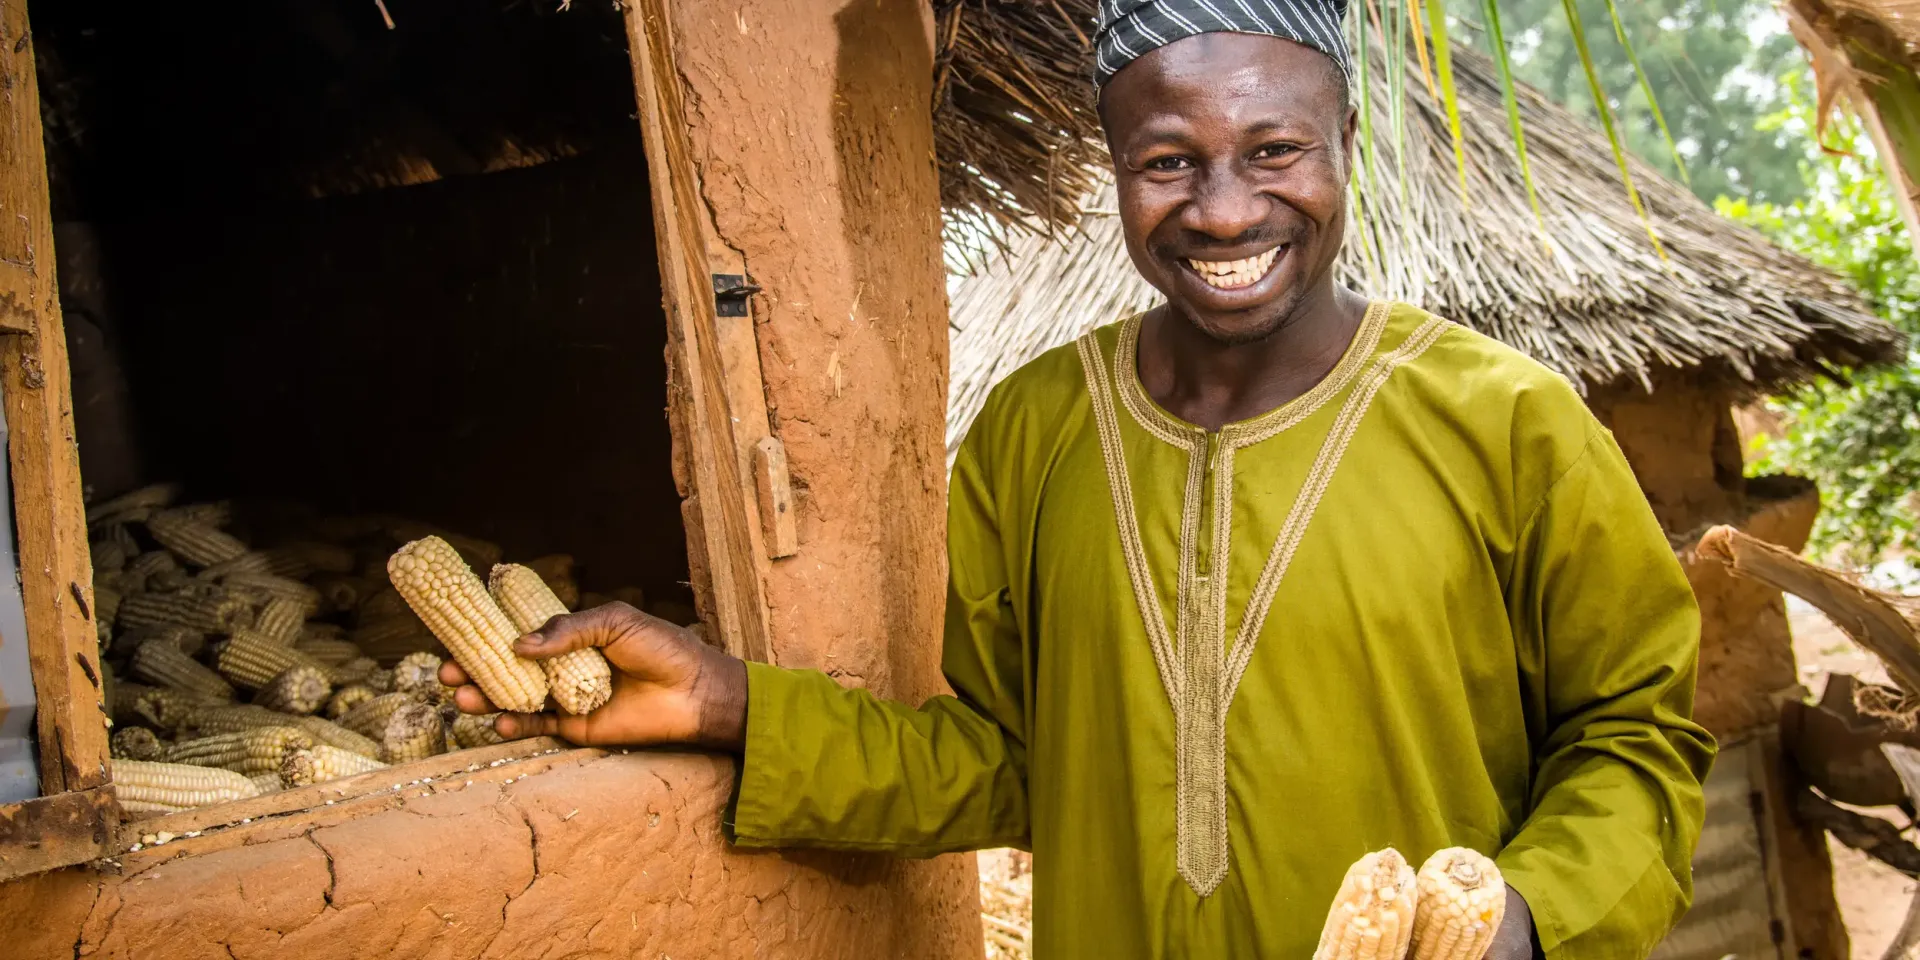 A smiling farmer holding maize in their hands and standing next to their harvest.